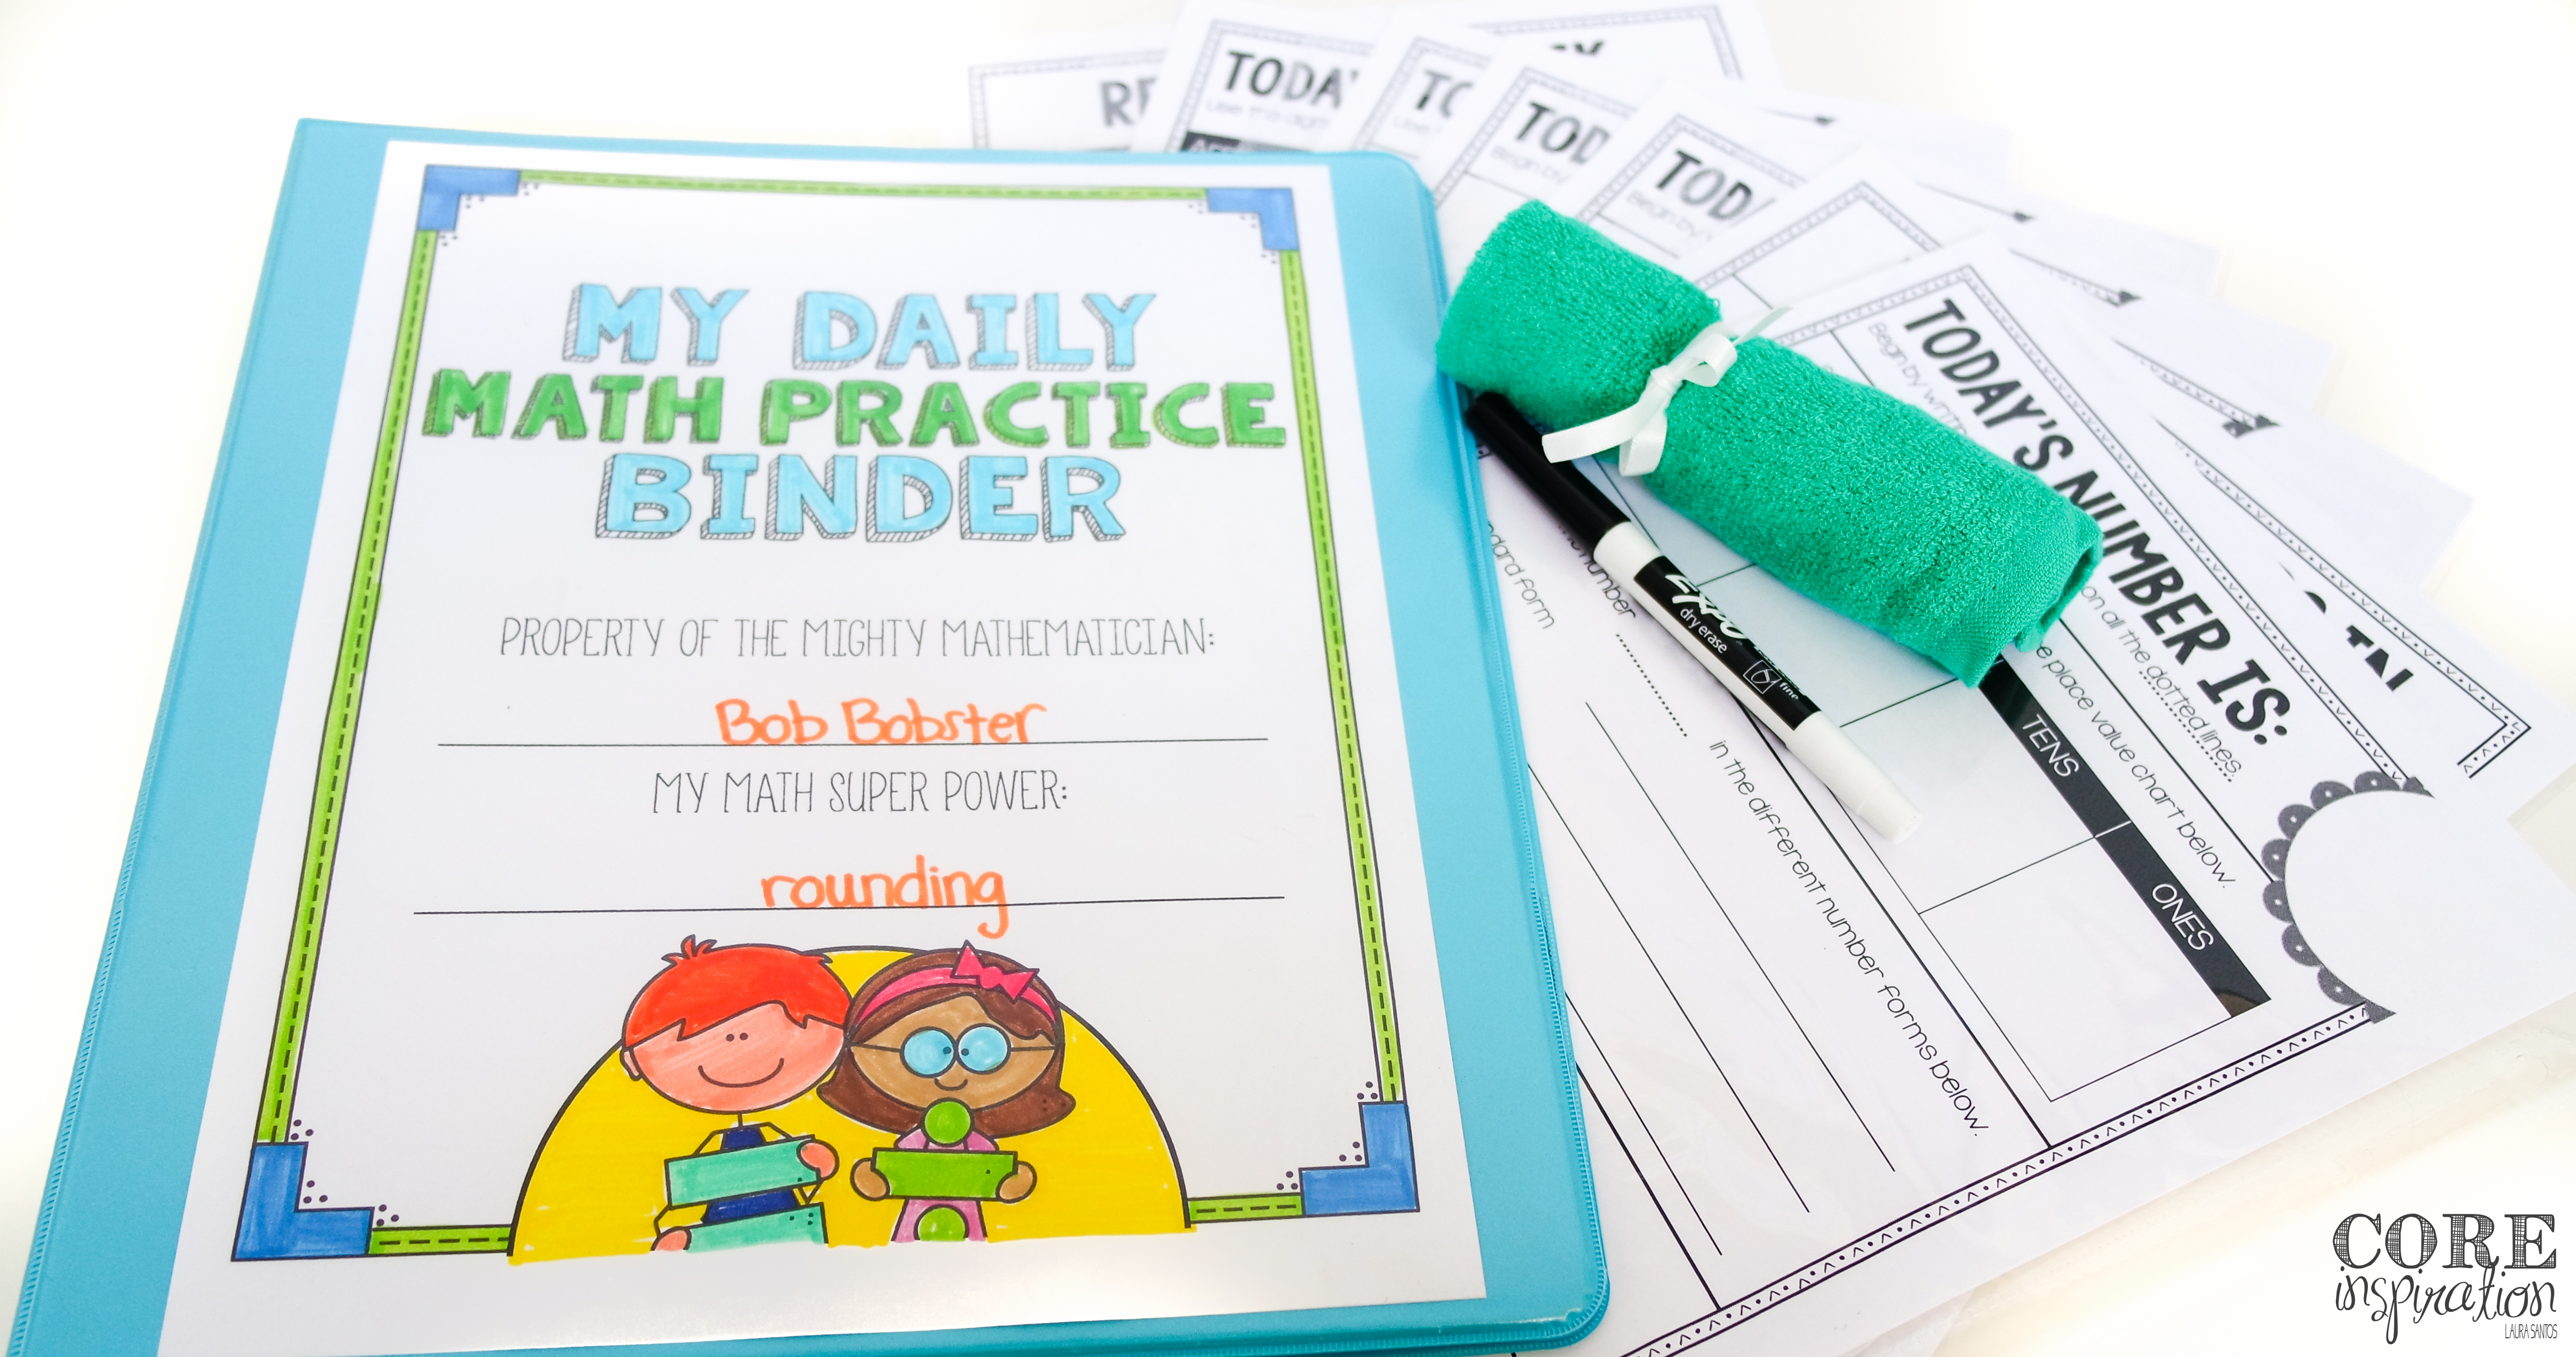 To get started with using a number of the day binder in your classroom, gather sheet protectors, white board markers, washcloths or erasers, and a binder for each student. 